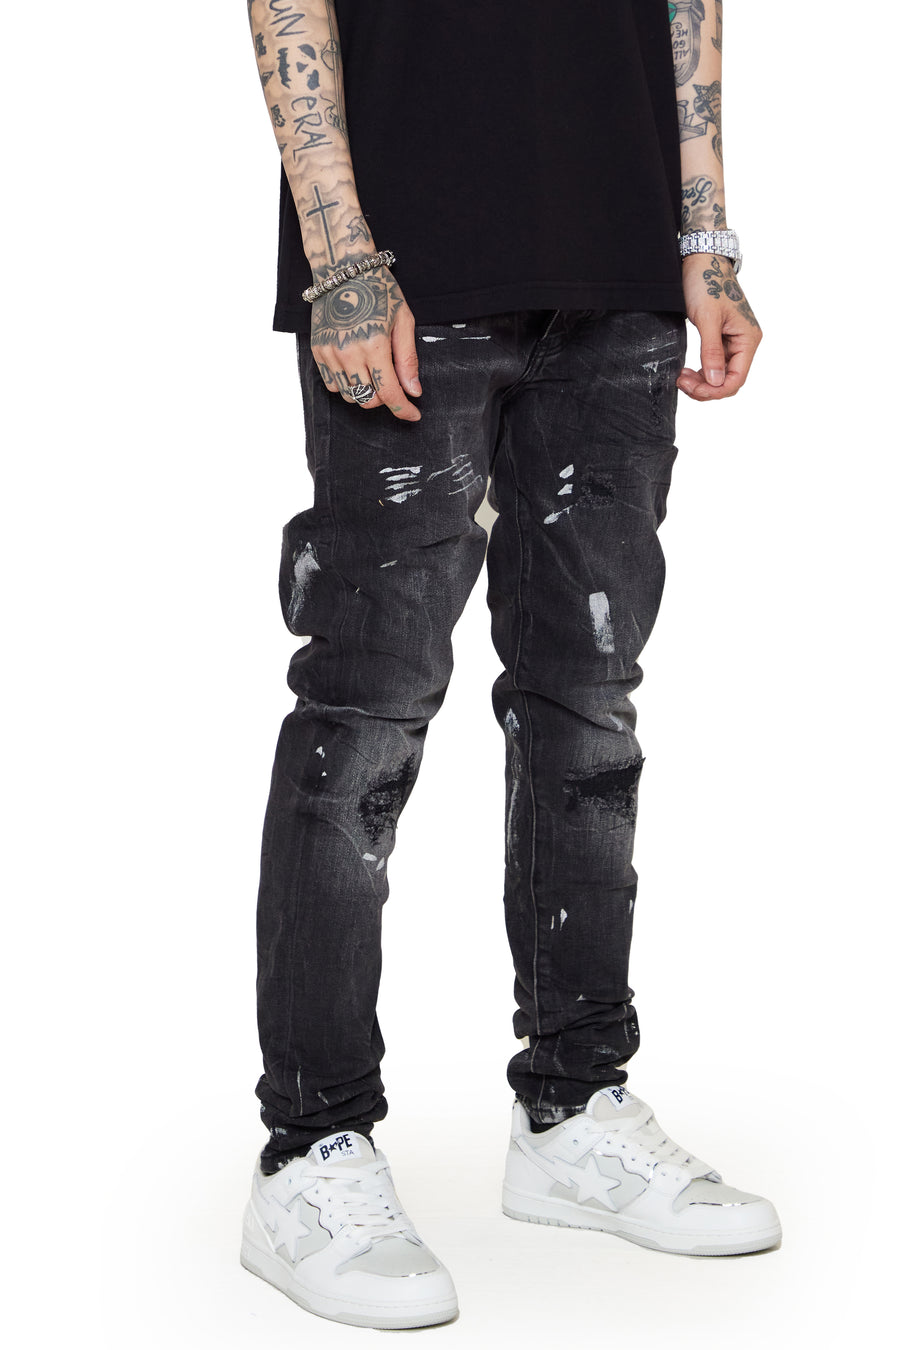 Buy Flying Machine Jeans from Online Shop in India - NNNOW